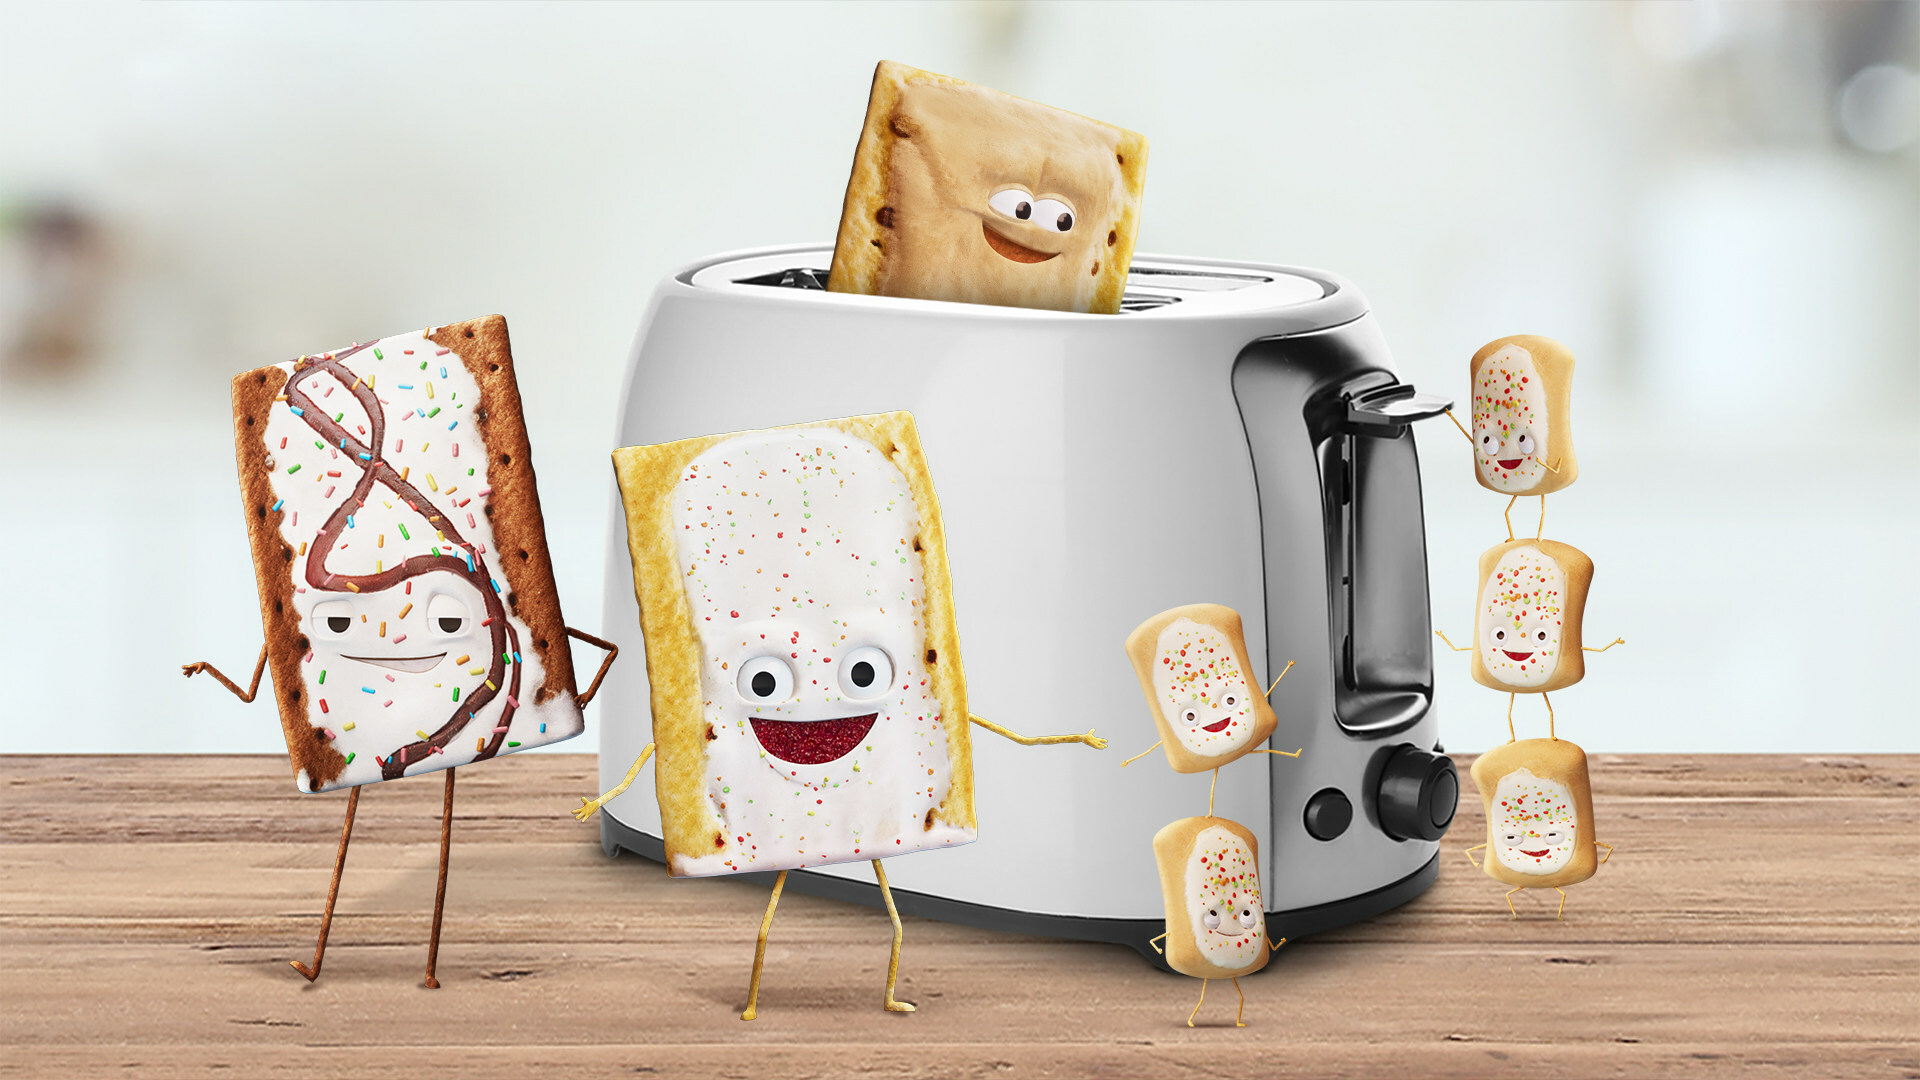 Pop-Tarts® introduces Agents of Crazy Good characters in new creative direction.